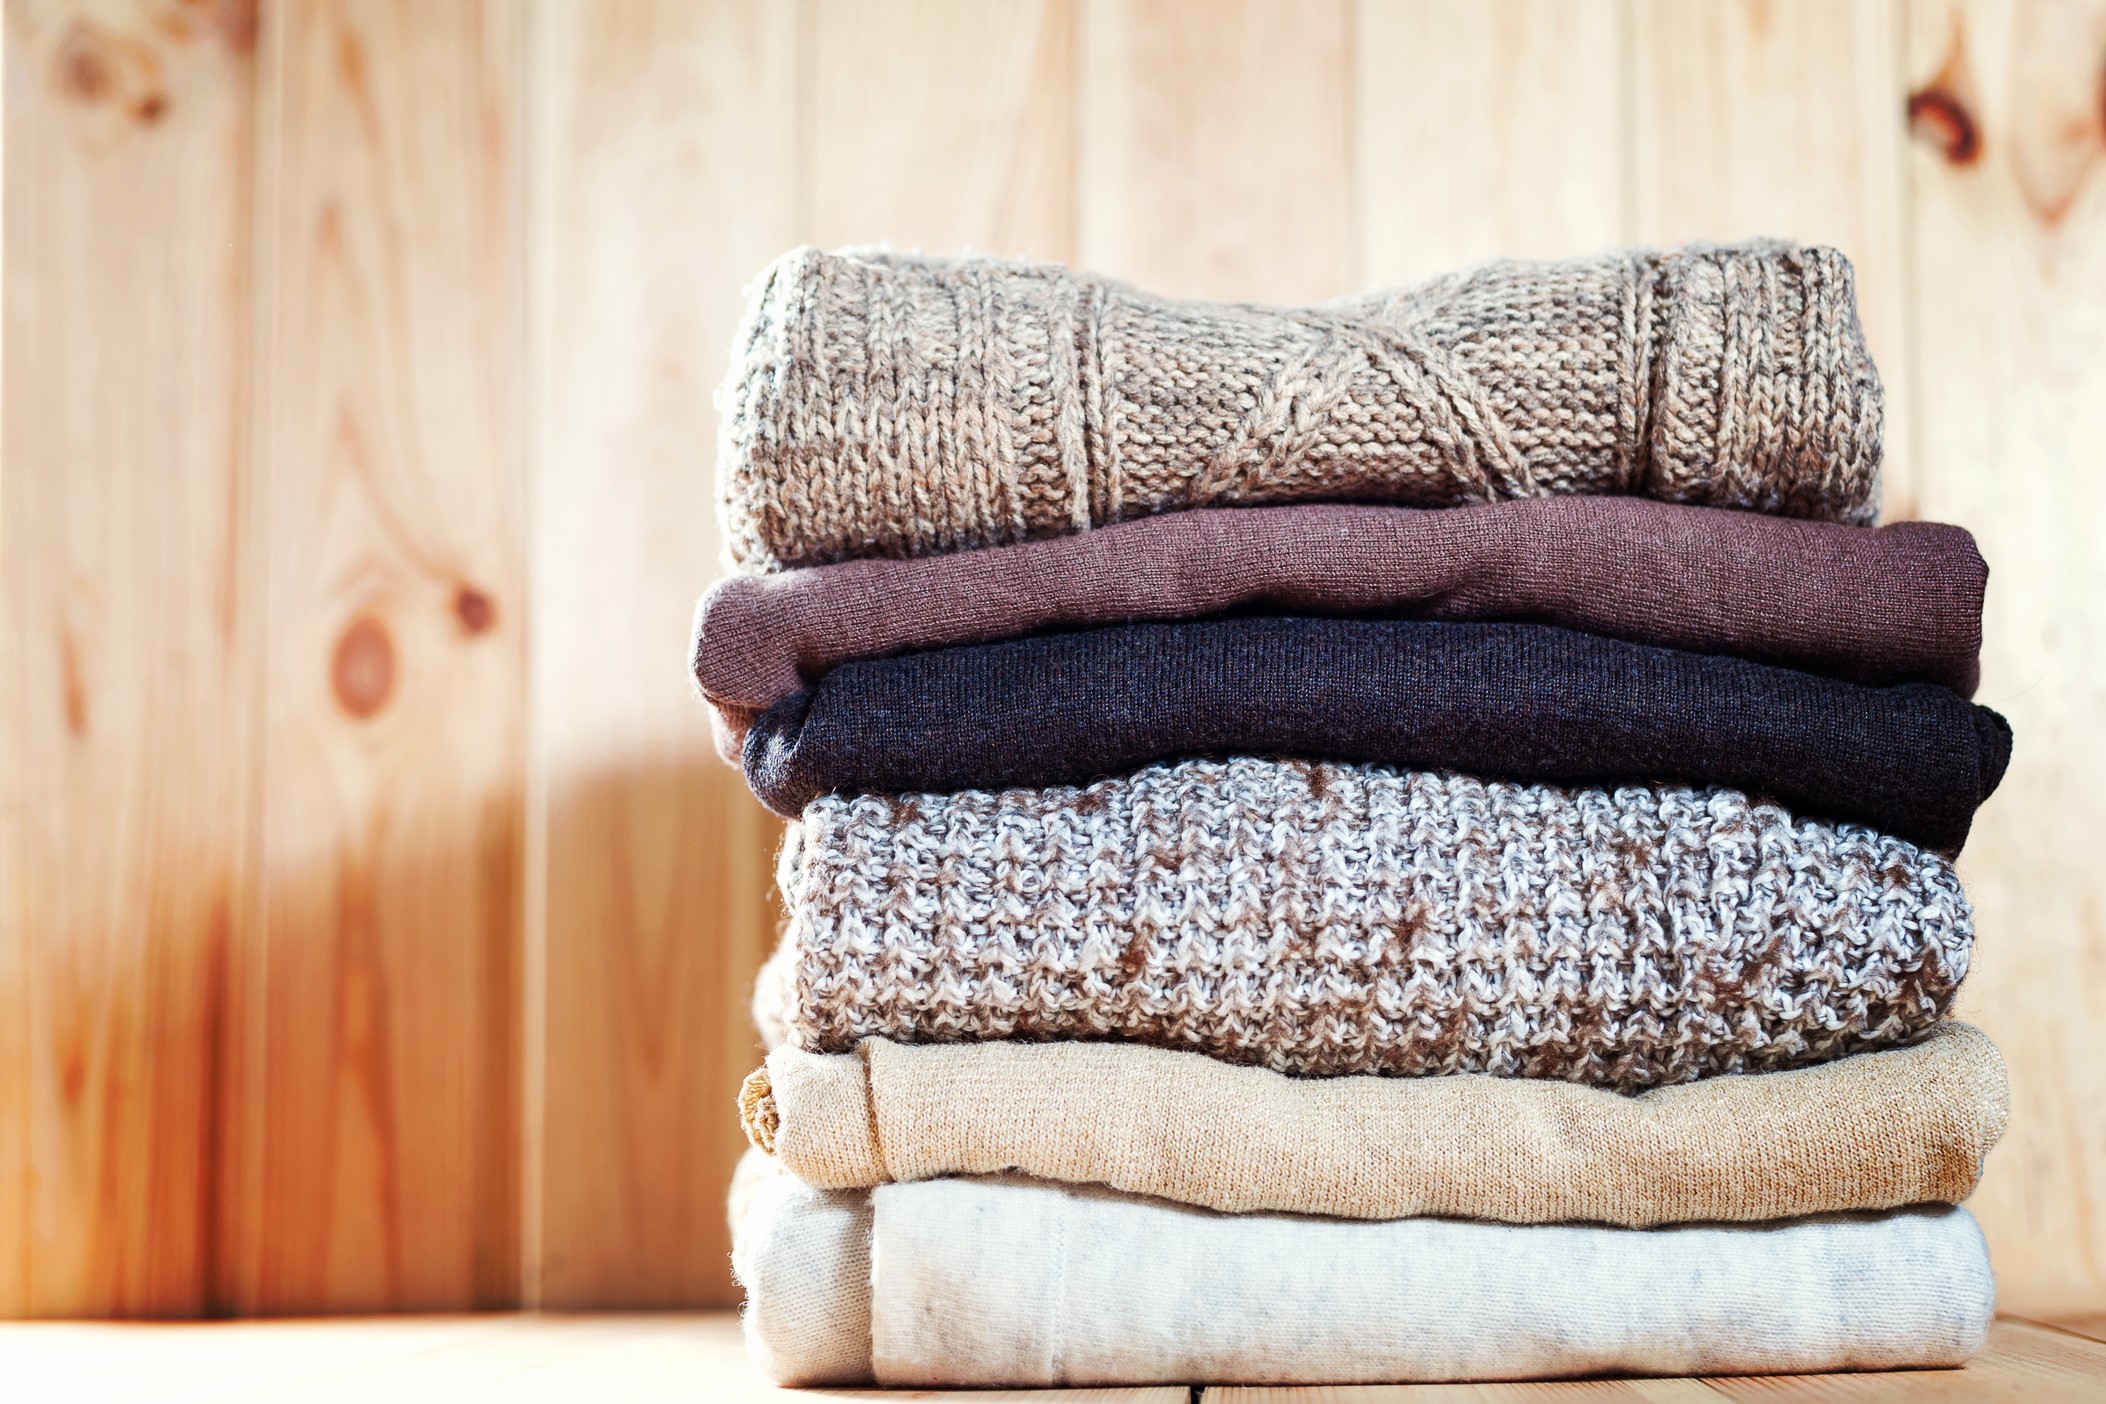 How to wash a cashmere sweater without ruining it - The Manual